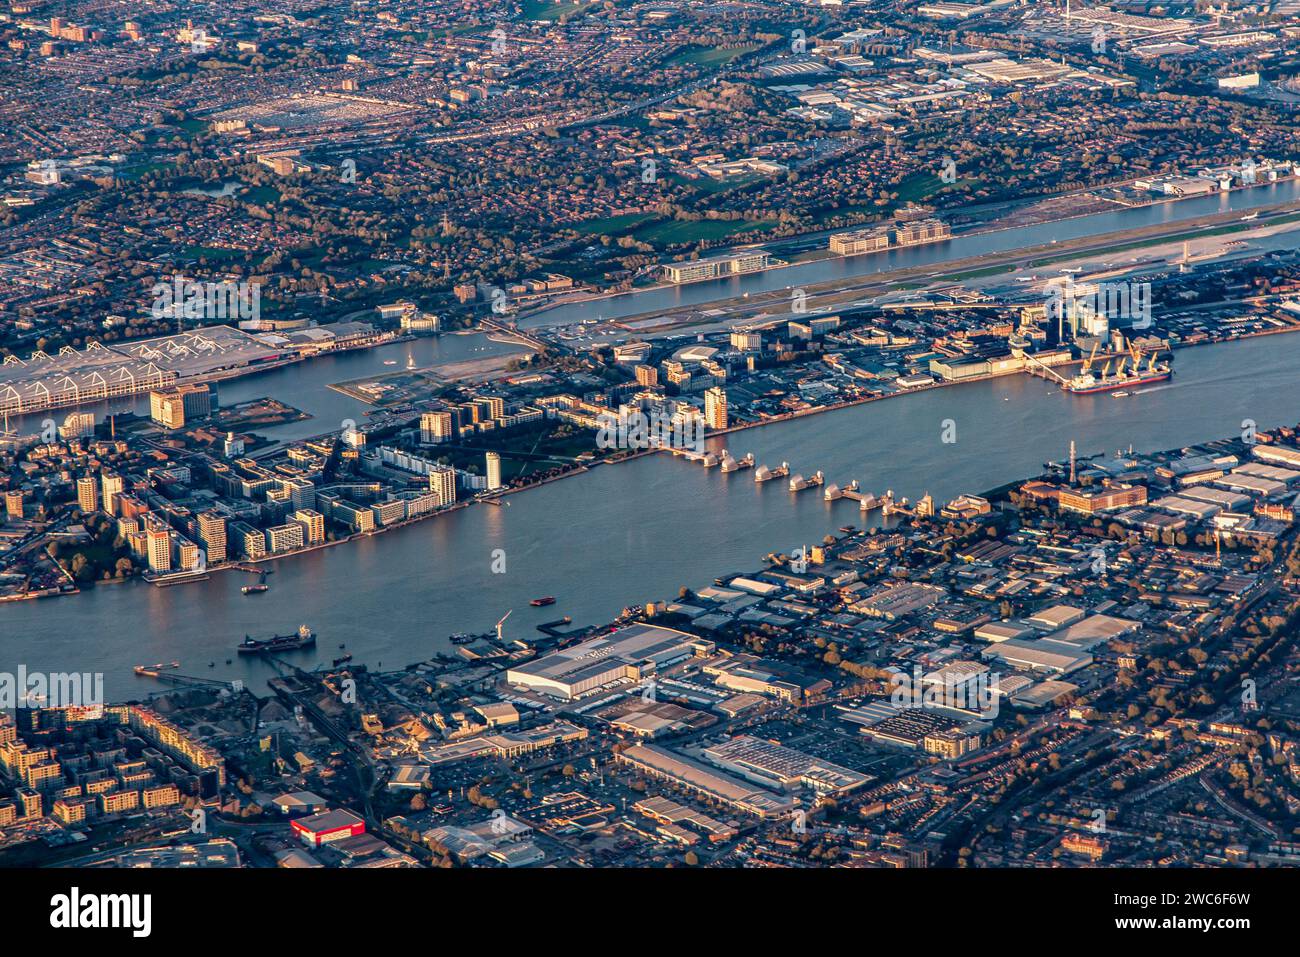 The Thames Barrier seen from above at dusk Stock Photo